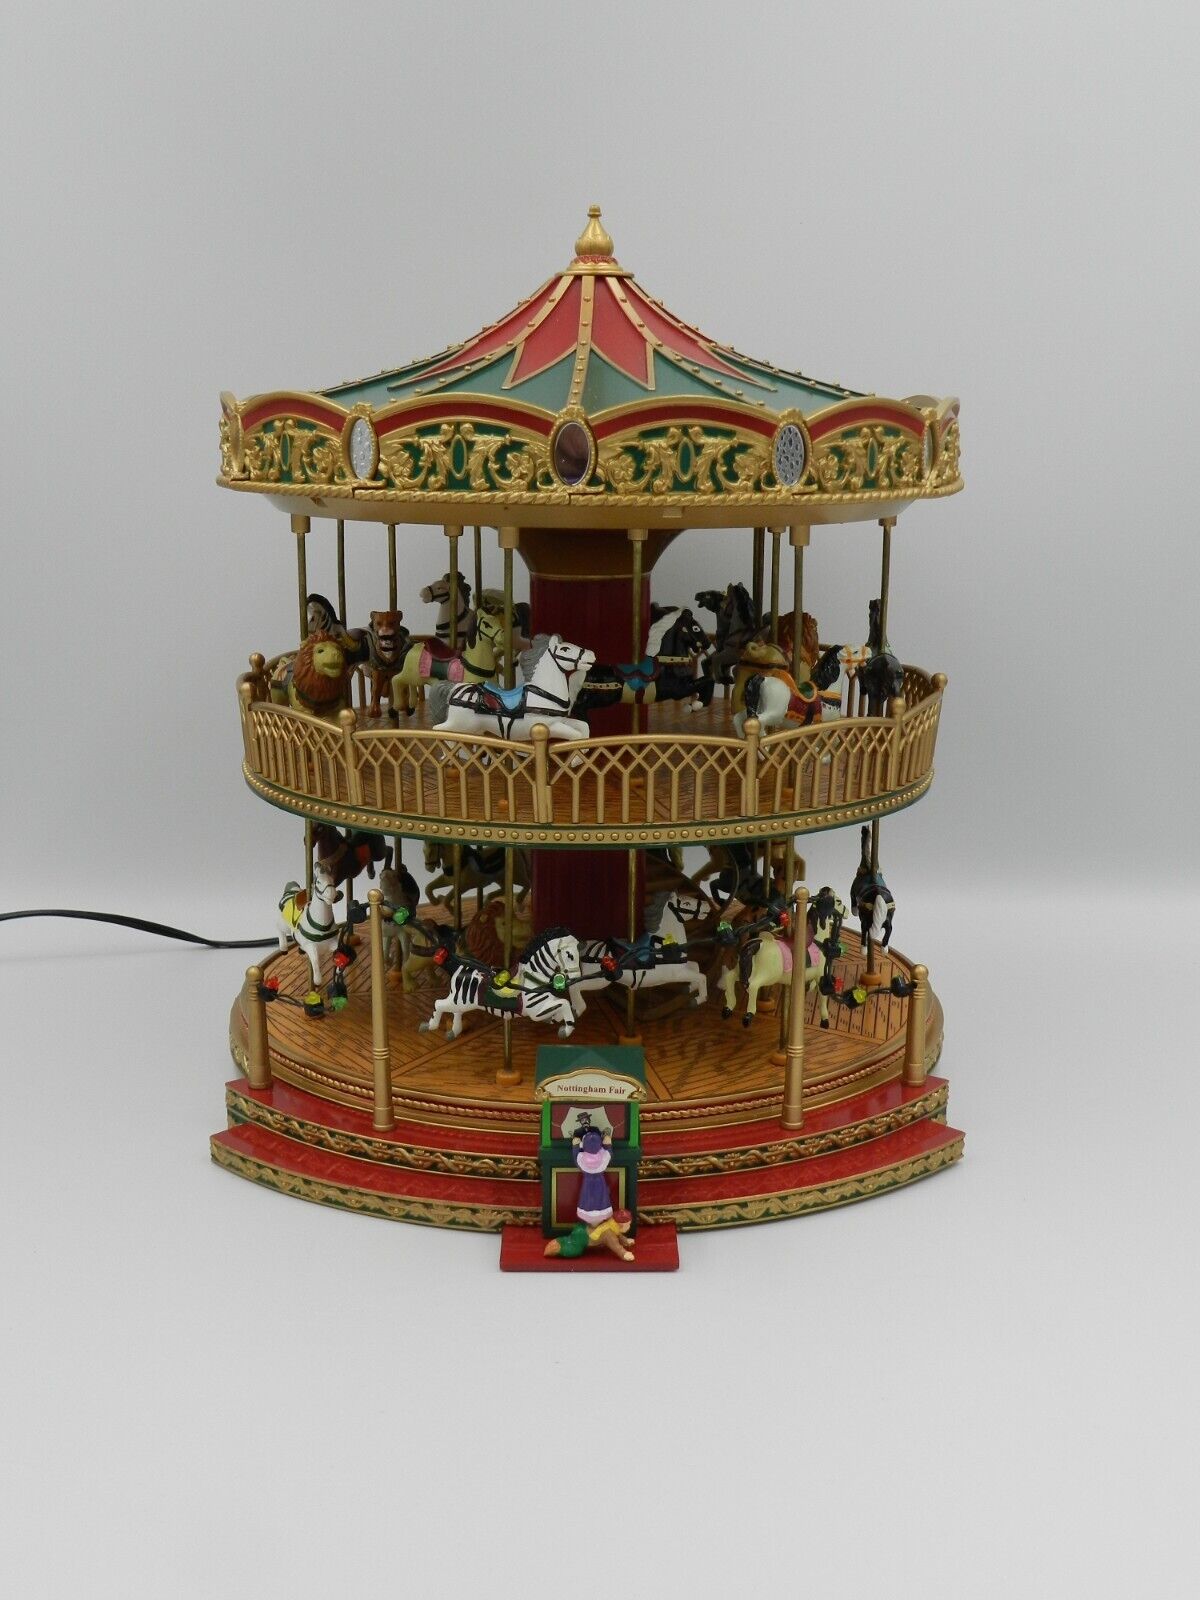 Mr. Christmas Animated Double Decker Carousel Music Light Up Spins 30 Songs